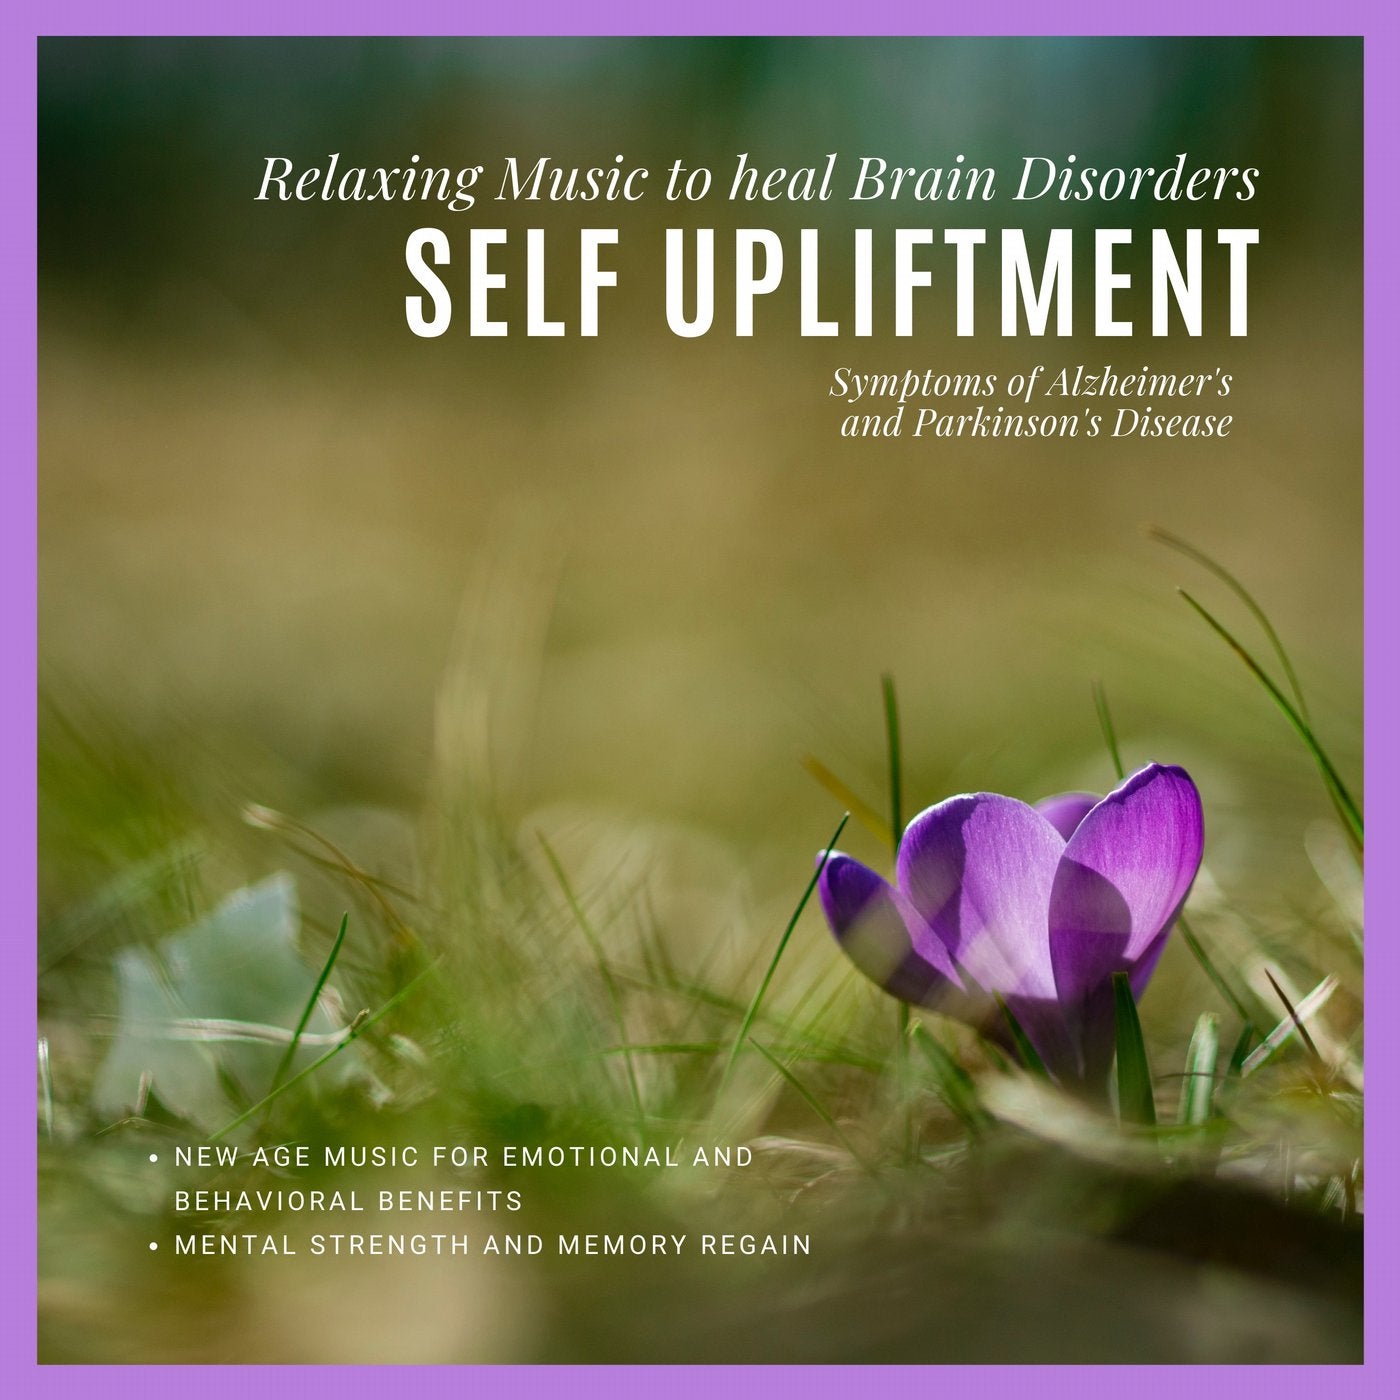 Self Upliftment (Relaxing Music To Heal Brain Disorders, Symptoms Of Alzheimer's And Parkinson's Disease) (New Age Music For Emotional And Behavioral Benefits, Mental Strength And Memory Regain)